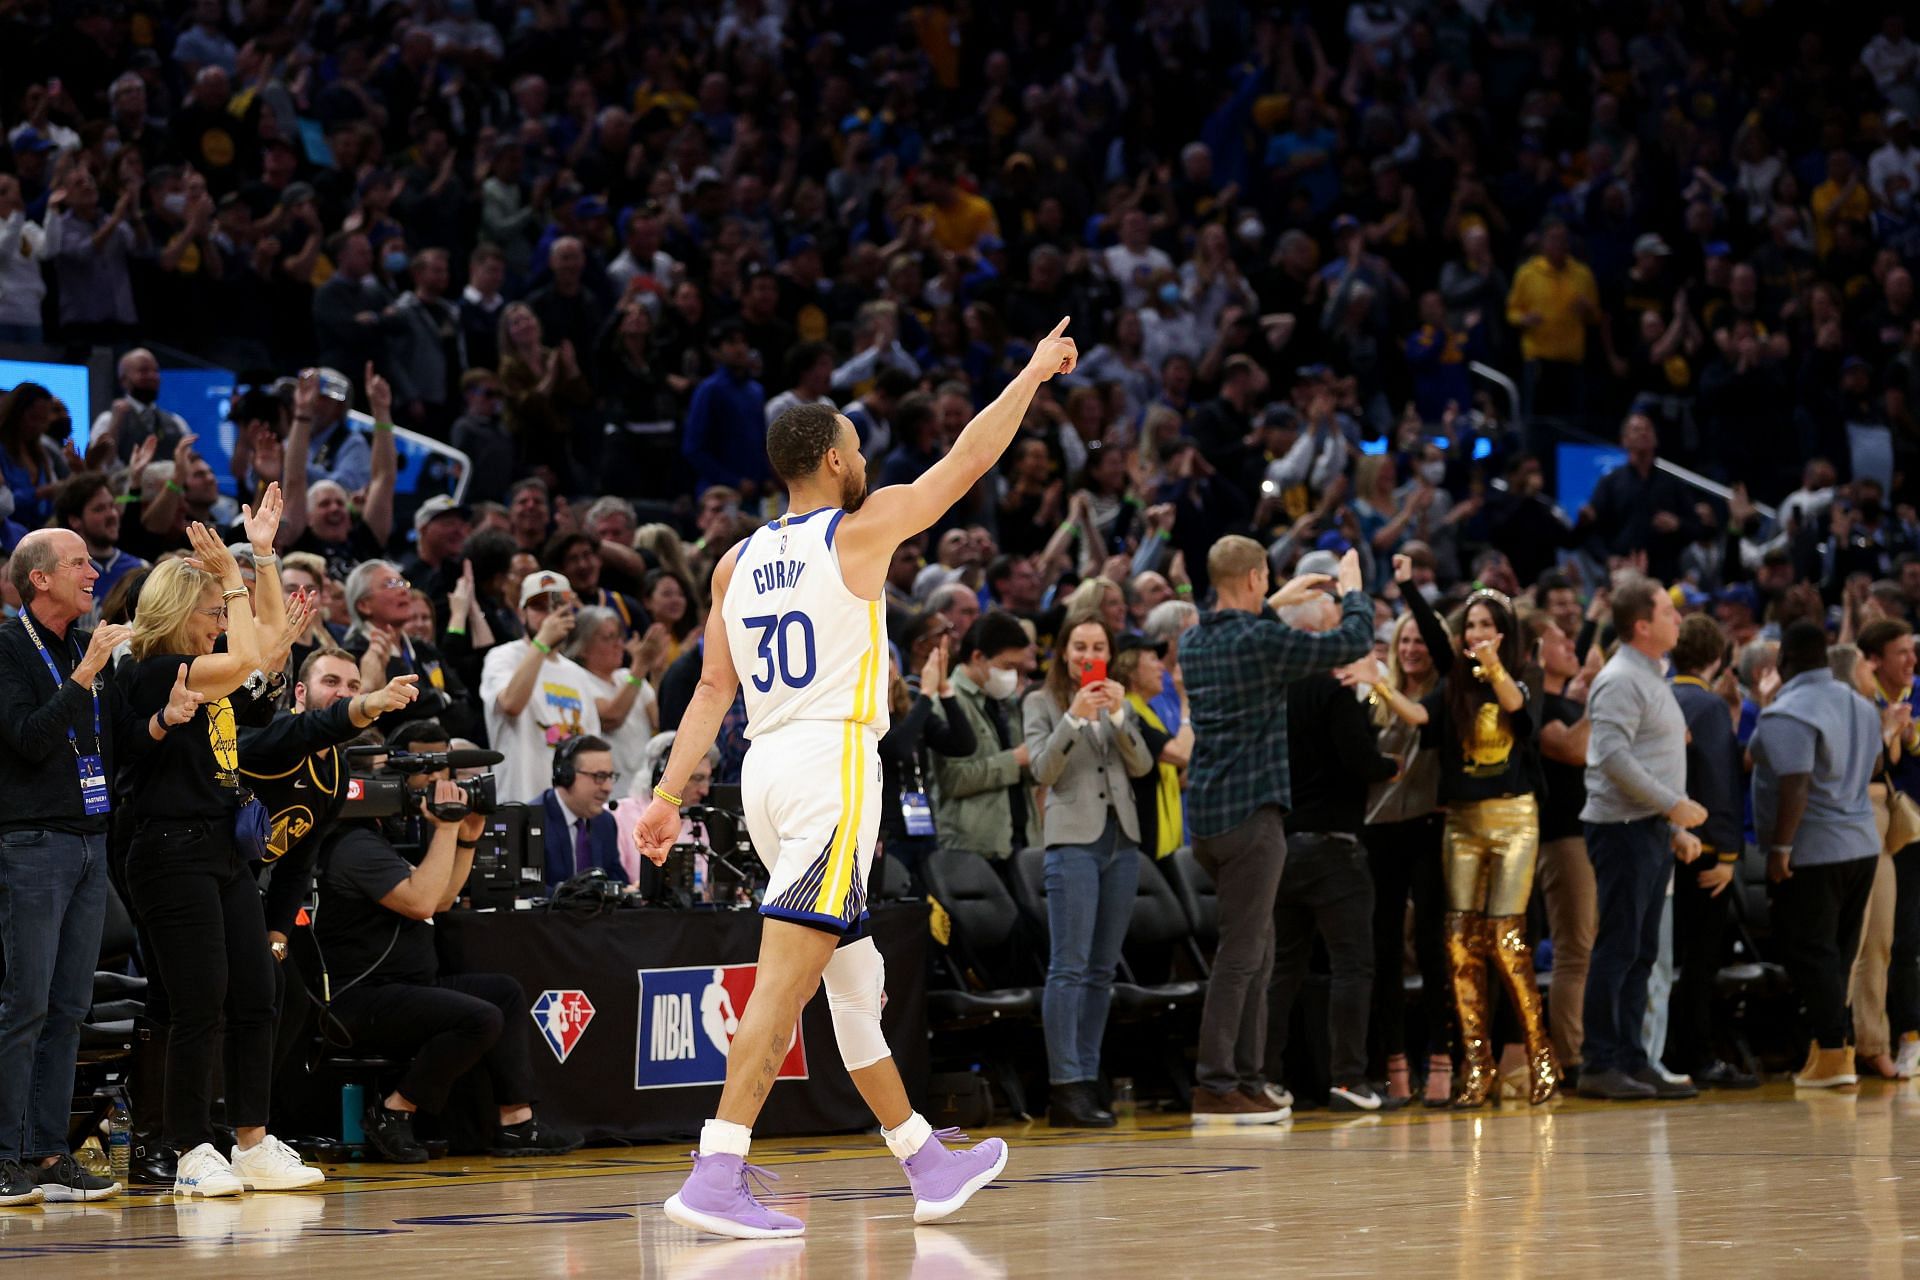 Steph Curry is the greatest shooter of all time, but his performance at the free-throw line and a clutch block from Draymond Green won the game for the Warriors last night.